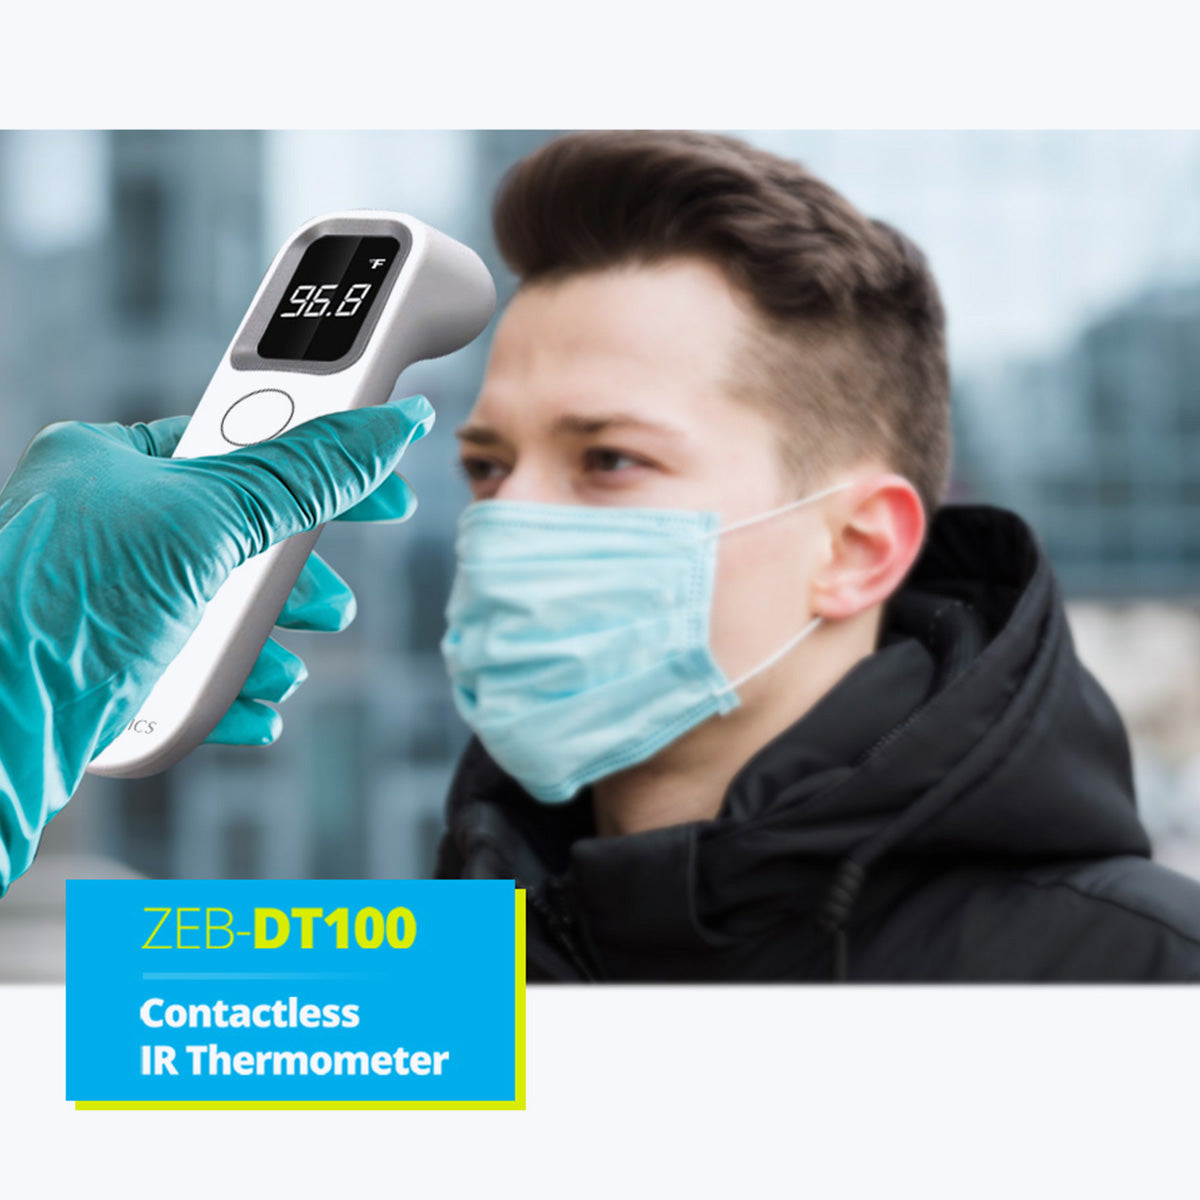 Zeb-DT100 - Contactless Infrared Thermometer - Zebronics